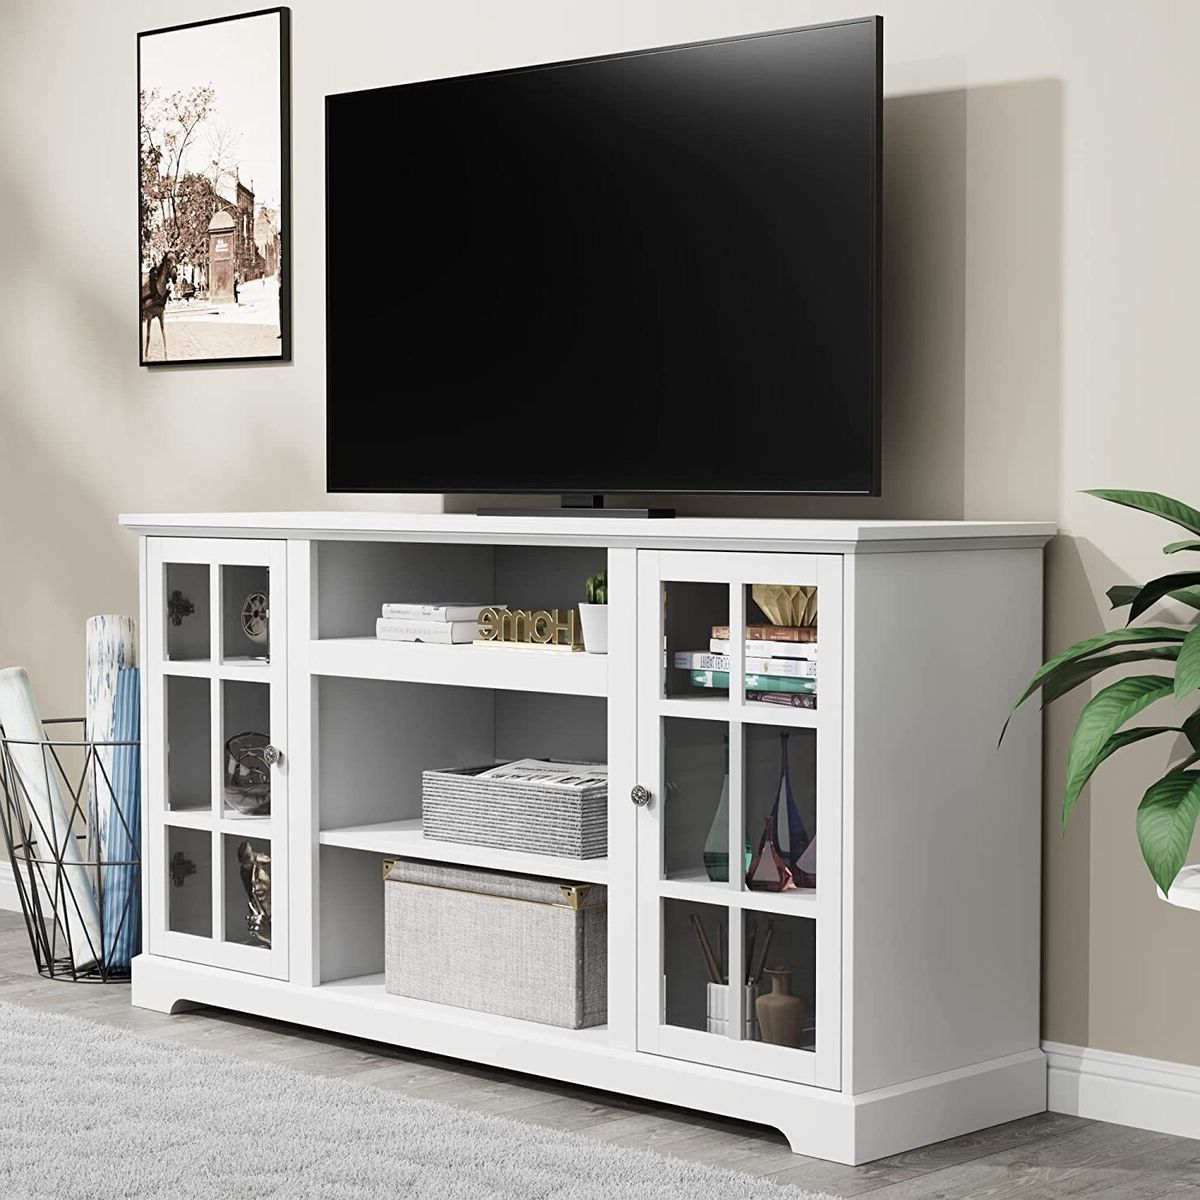 Modern Farmhouse Tv Stand For 65 Inch Tv Entertainment Center Storage  Cabinets | Ebay With Farmhouse Stands With Shelves (View 4 of 20)